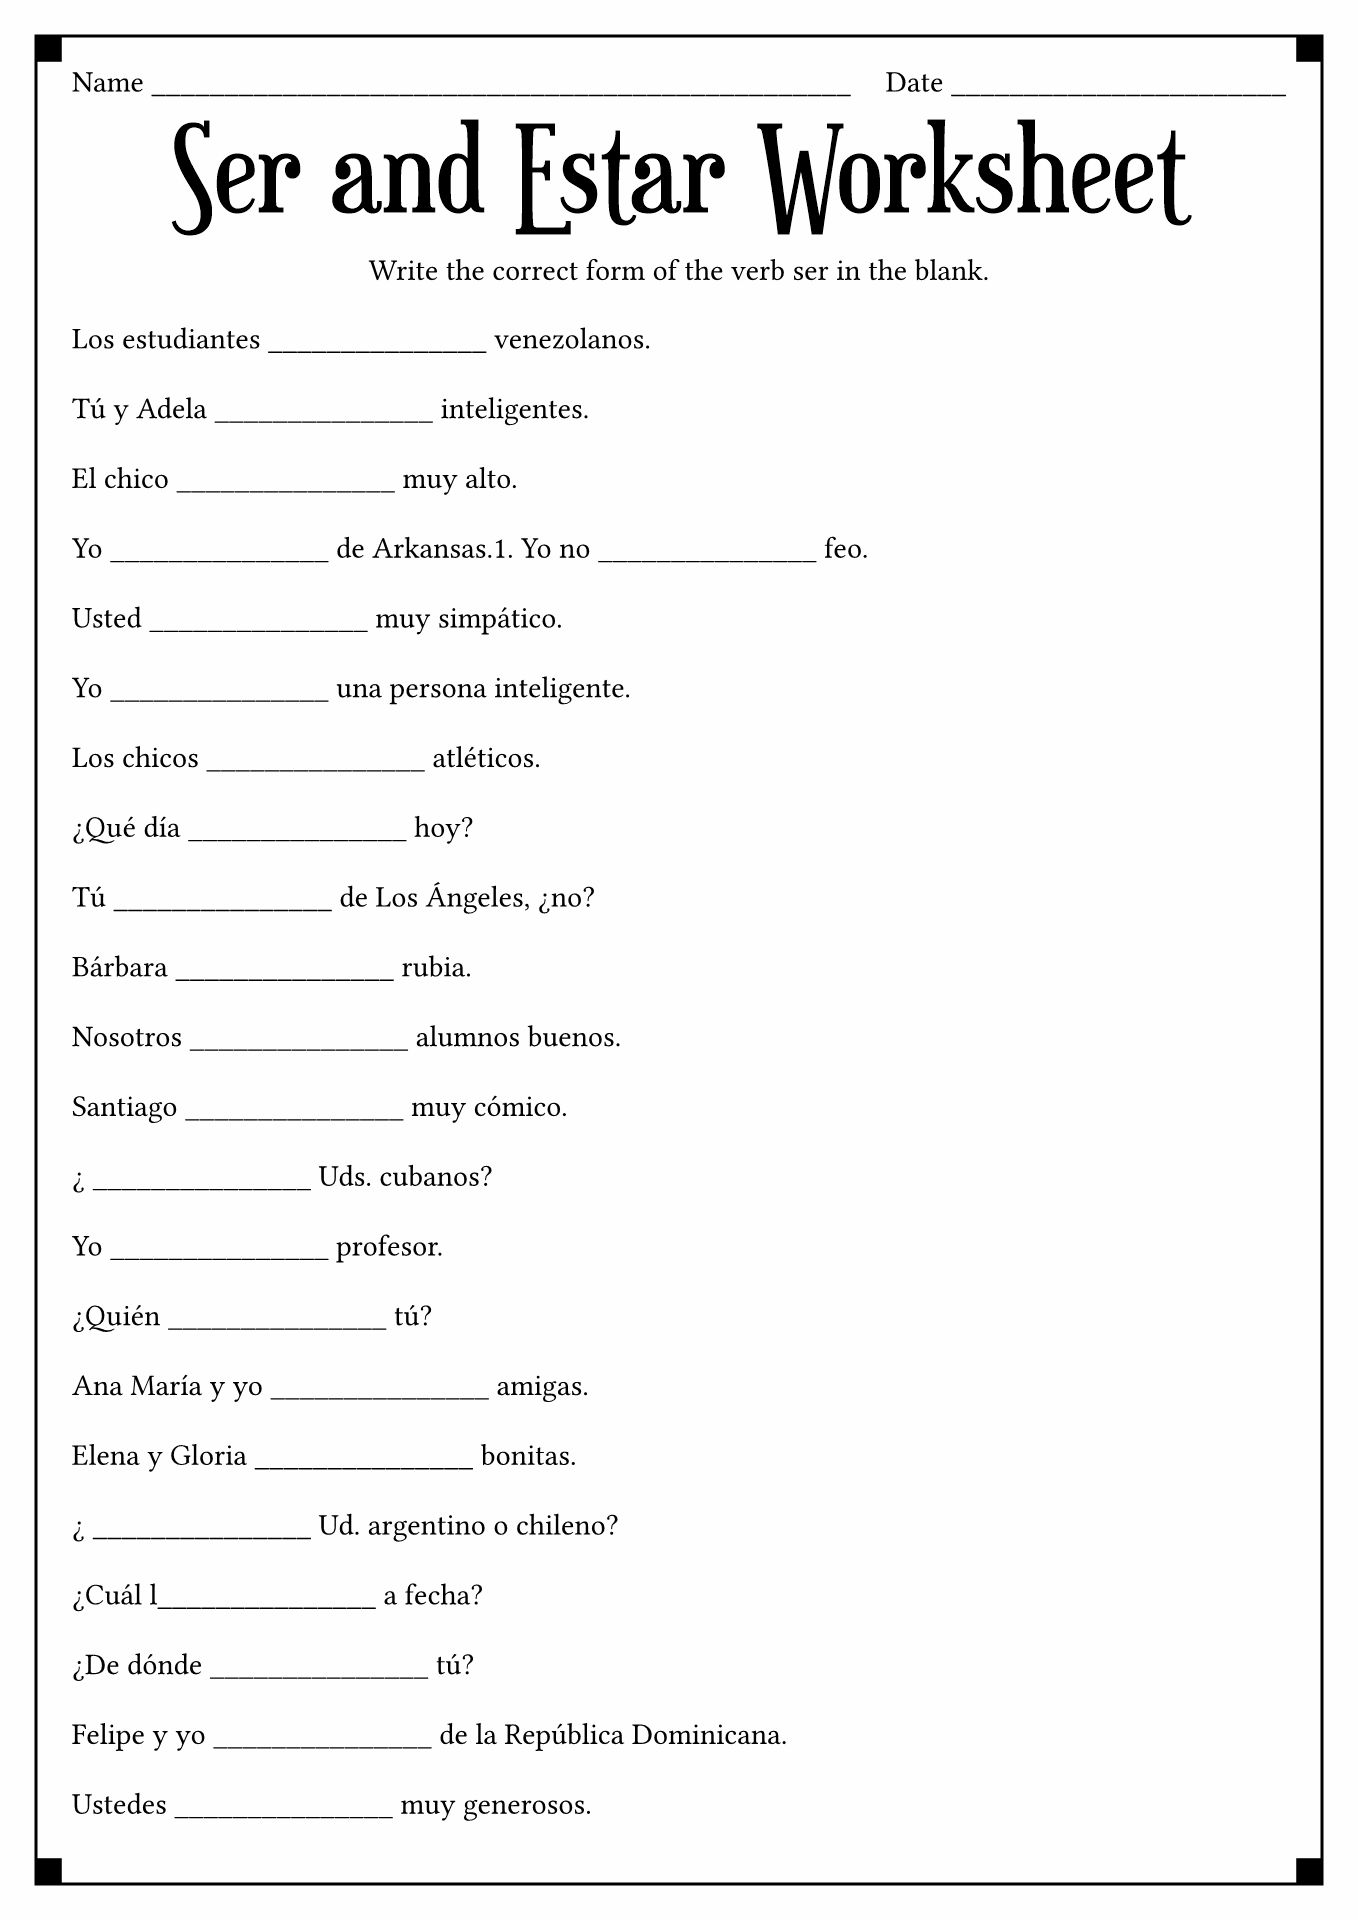 17 Best Images of A Personal In Spanish Worksheet Pinterest Spanish